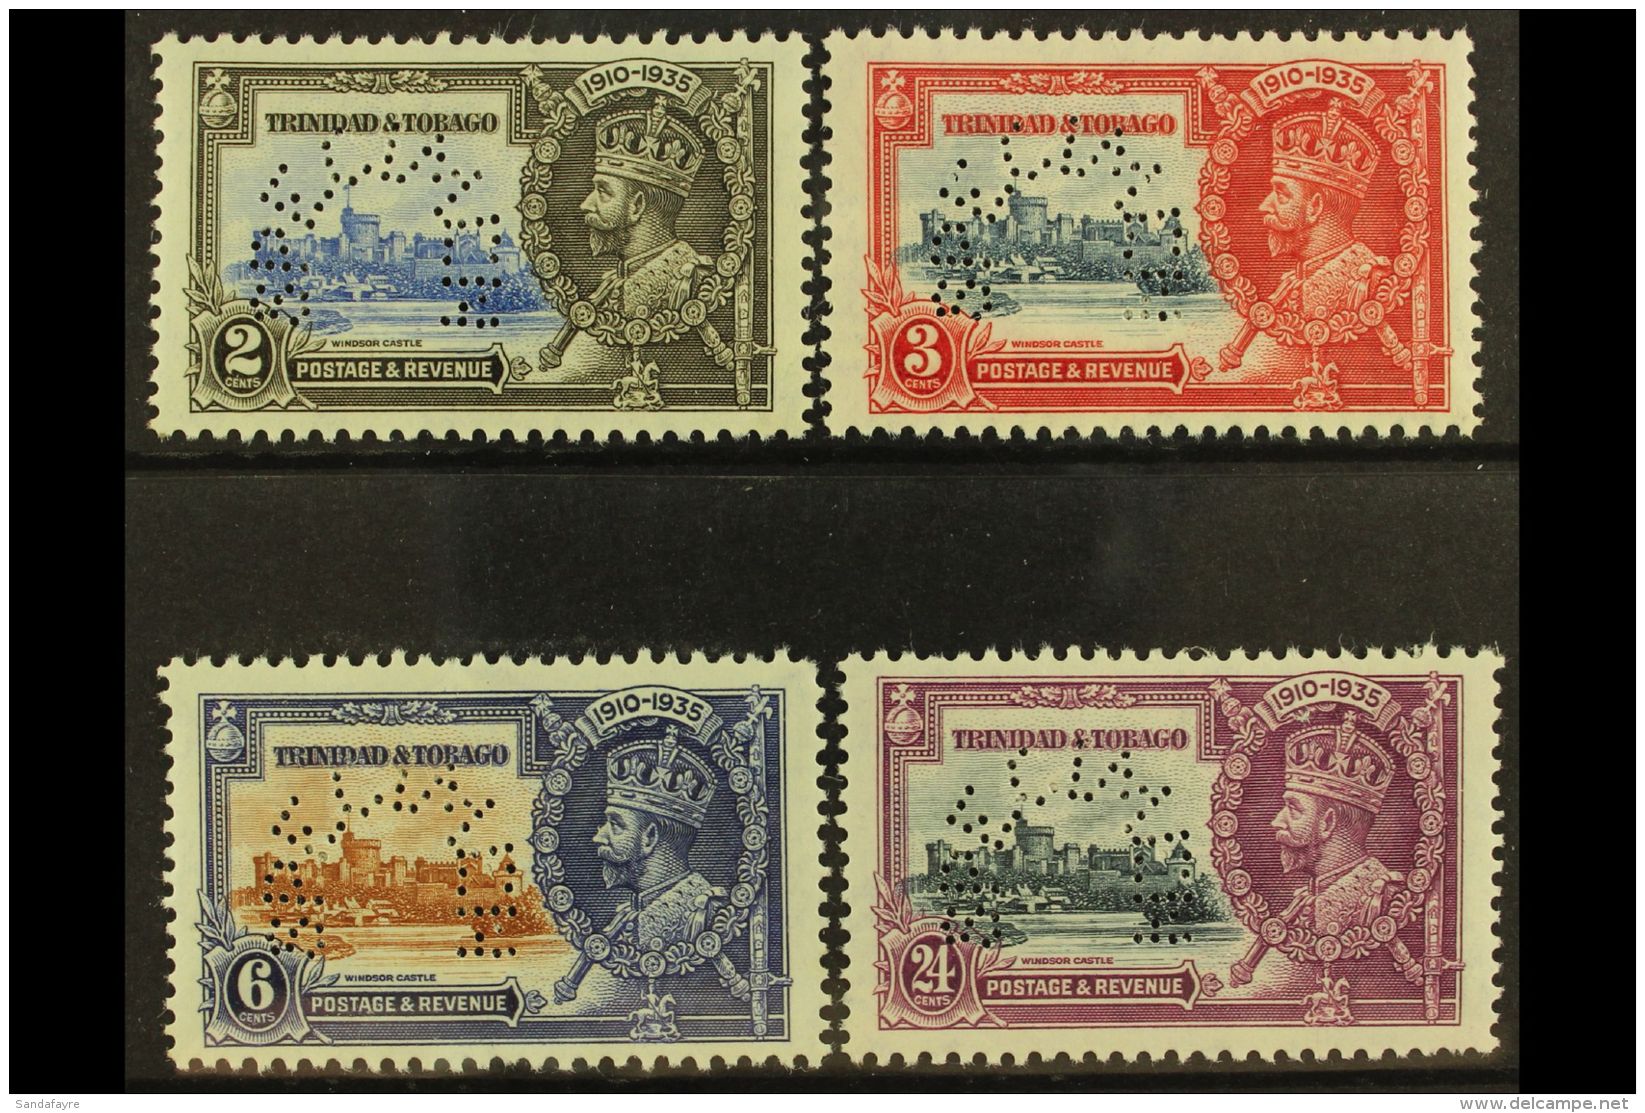 1935 Silver Jubilee Set Complete, Perforated "Specimen", SG 239s/42s, Fine Mint. (4 Stamps) For More Images,... - Trinité & Tobago (...-1961)